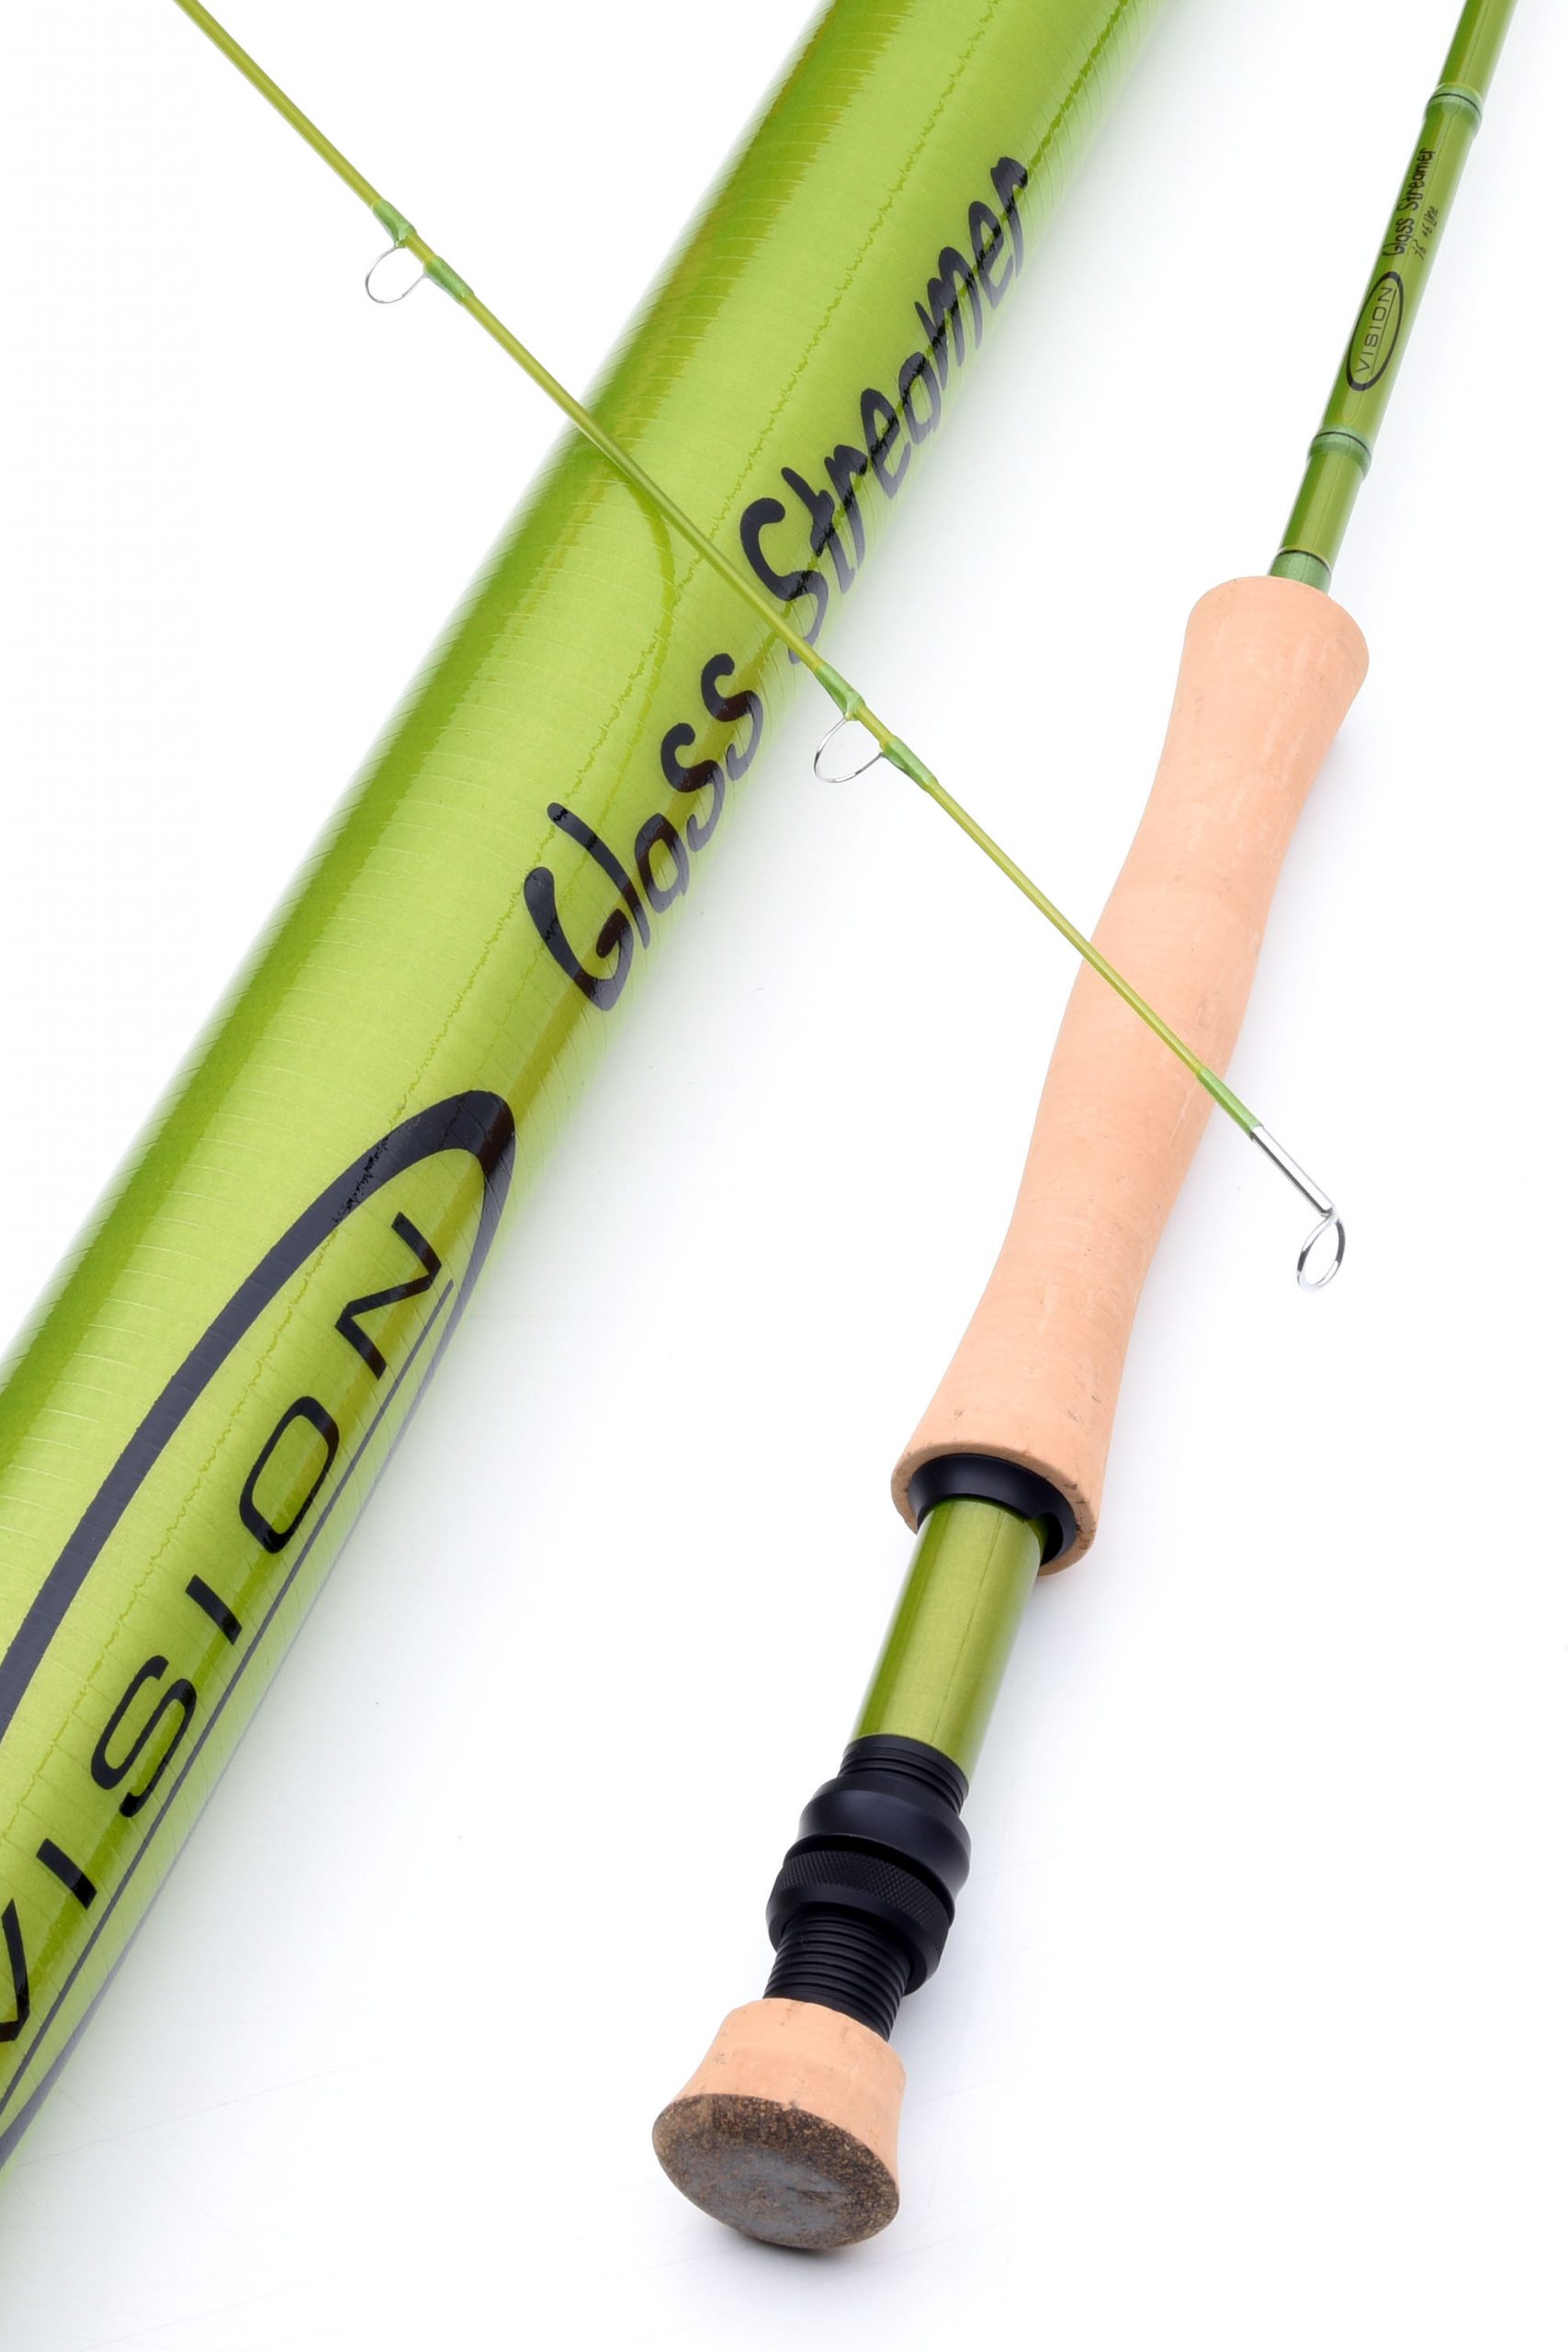 Vision Glass Streamer Fly Rod – Guide Flyfishing, Fly Fishing Rods, Reels, Sage, Redington, RIO